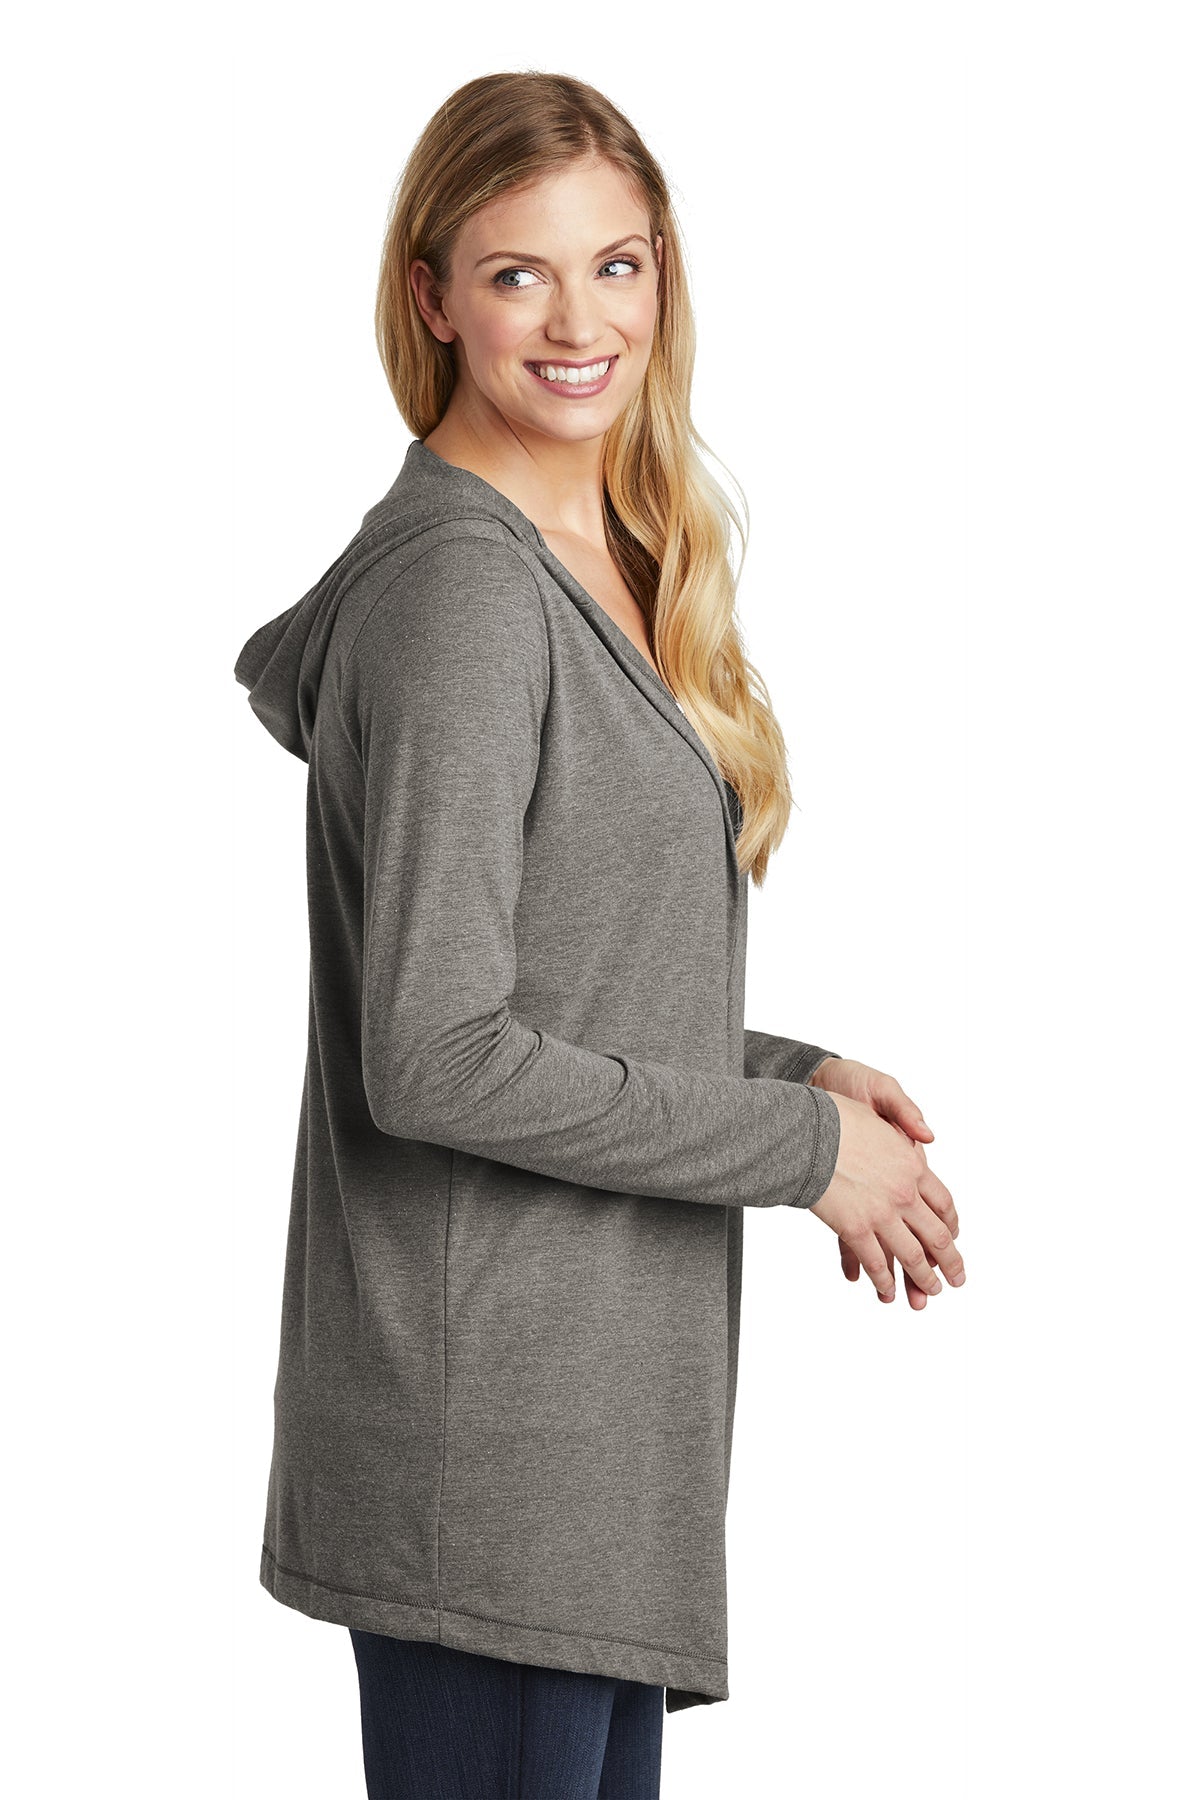 DT156 District ® Women’s Perfect Tri ® Hooded Cardigan